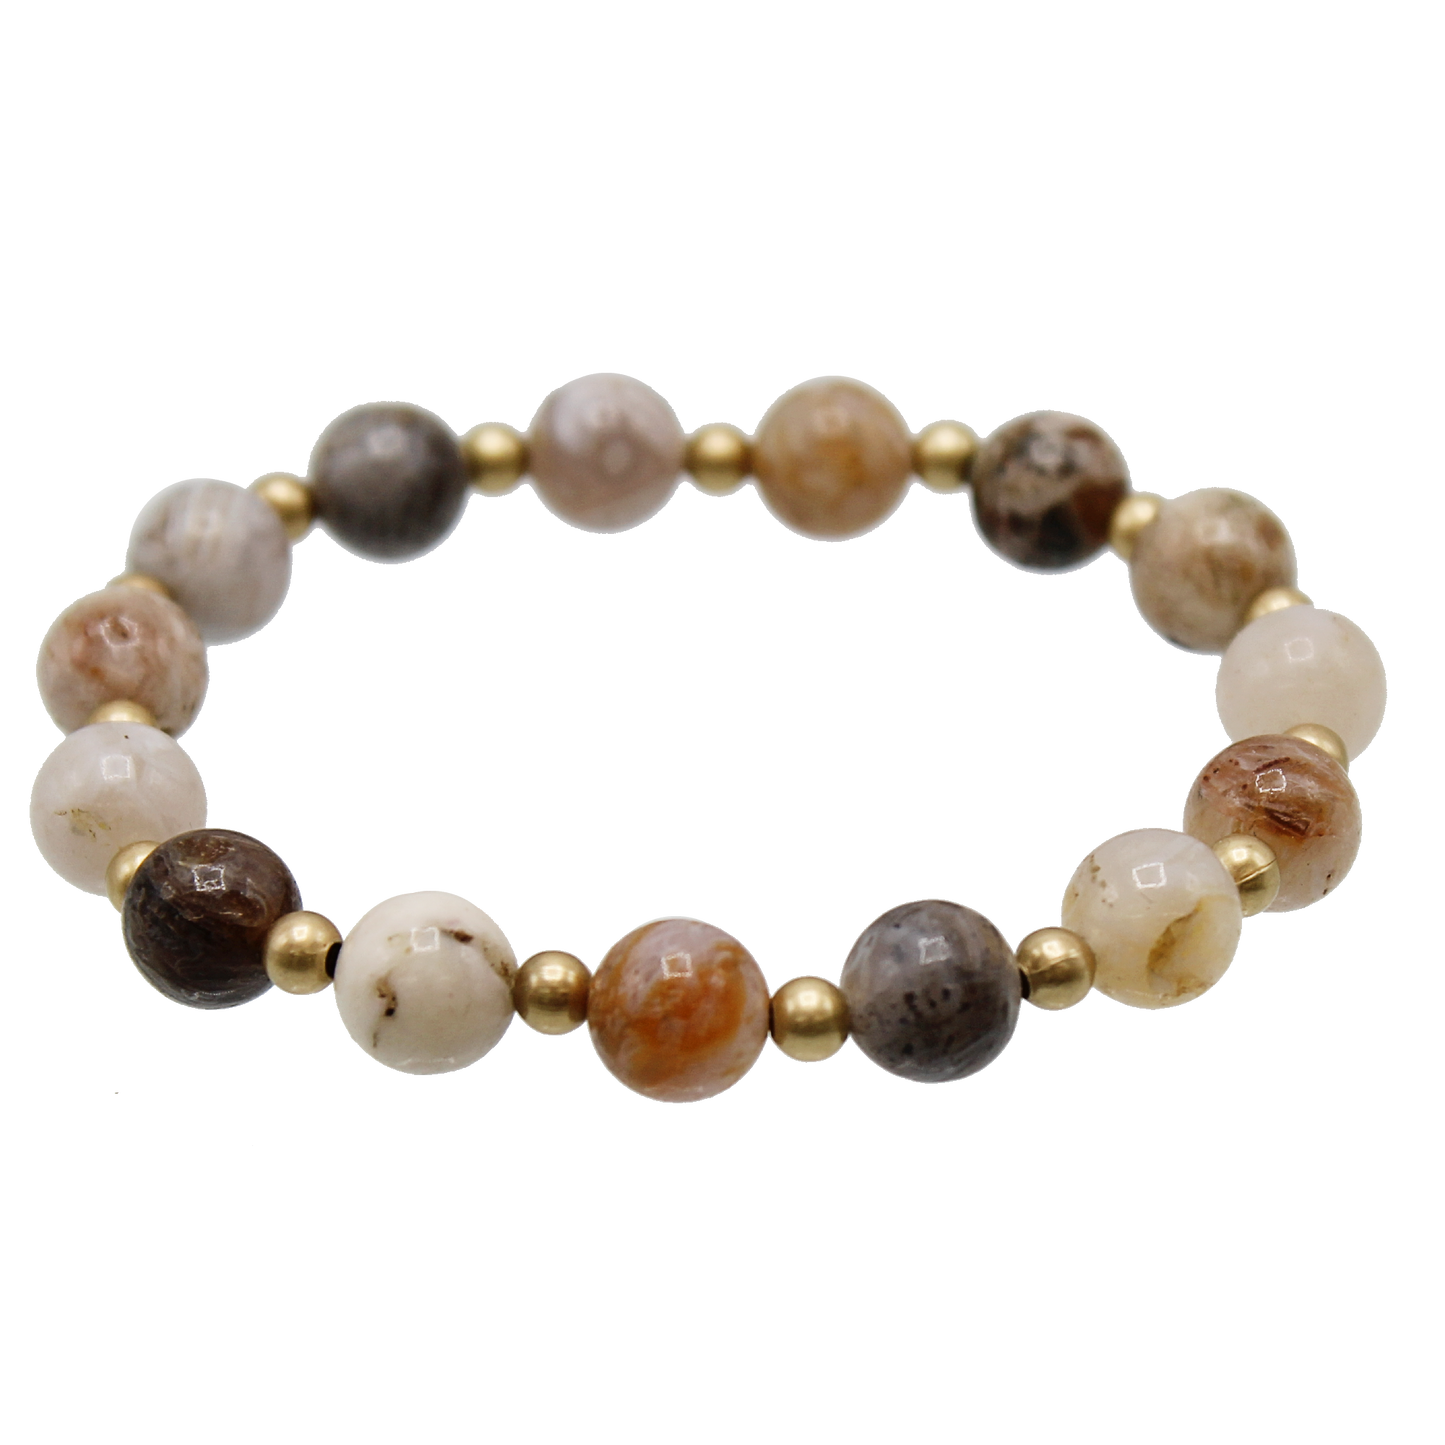 A beaded bracelet with genuine Agate beads and gold spacer beads in between.